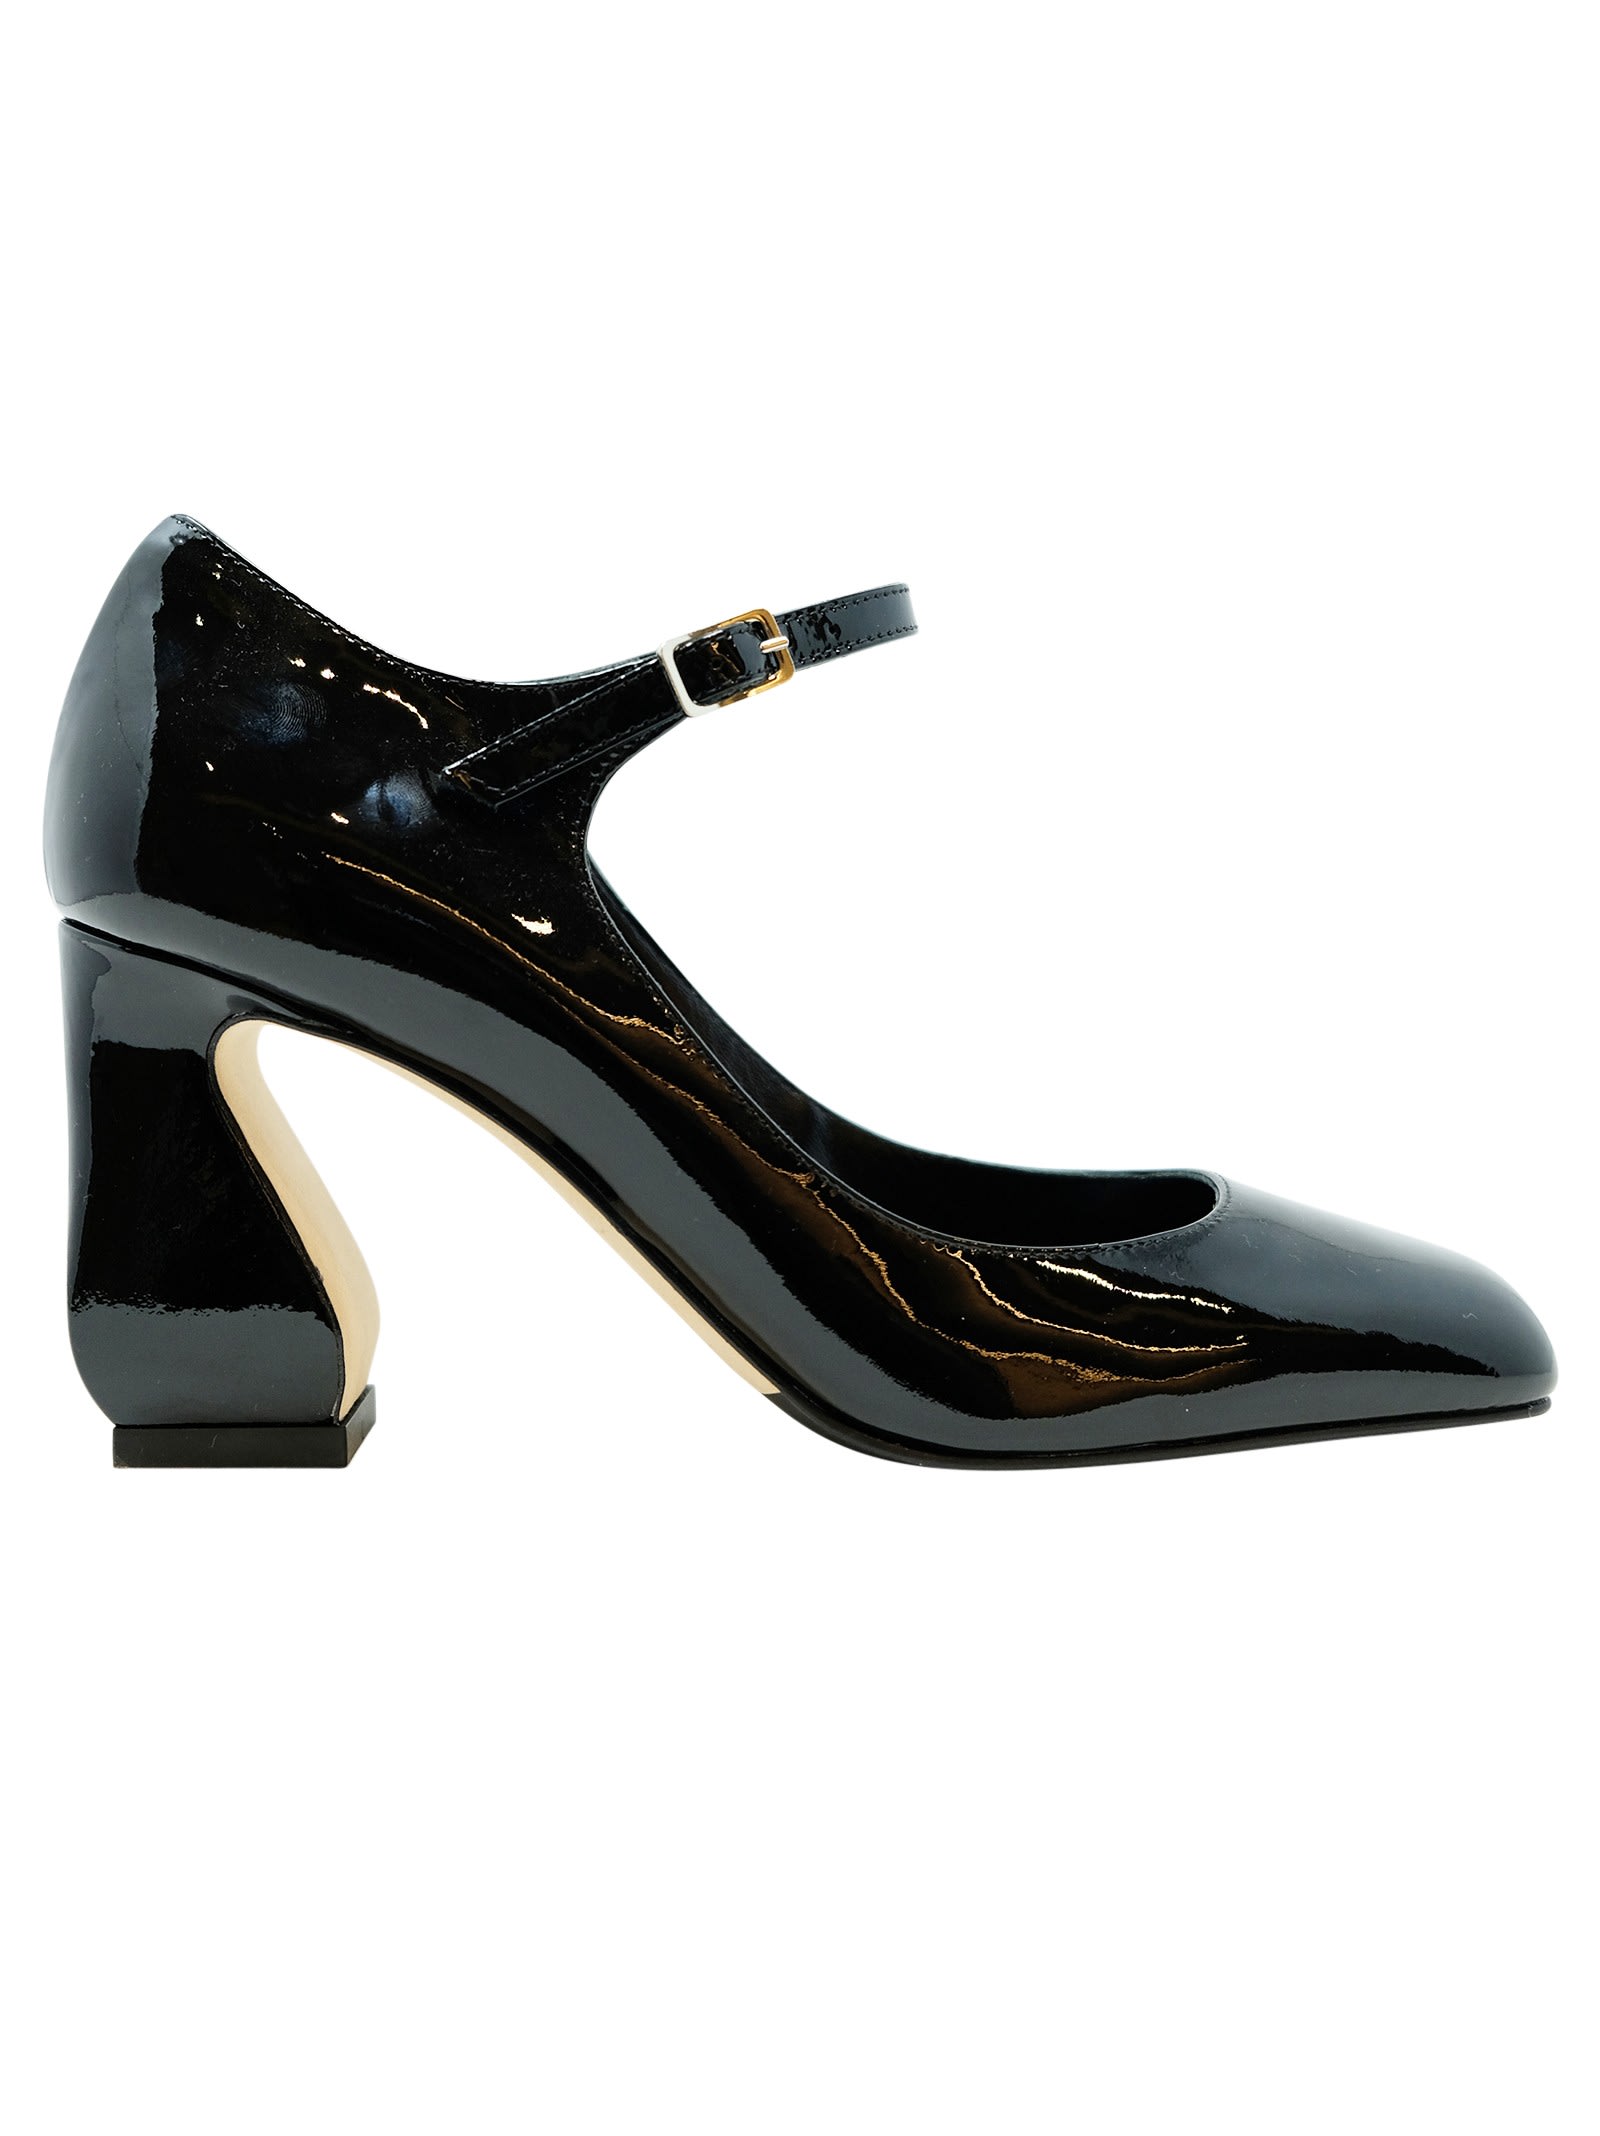 Si Rossi Black Patent Leather Pumps